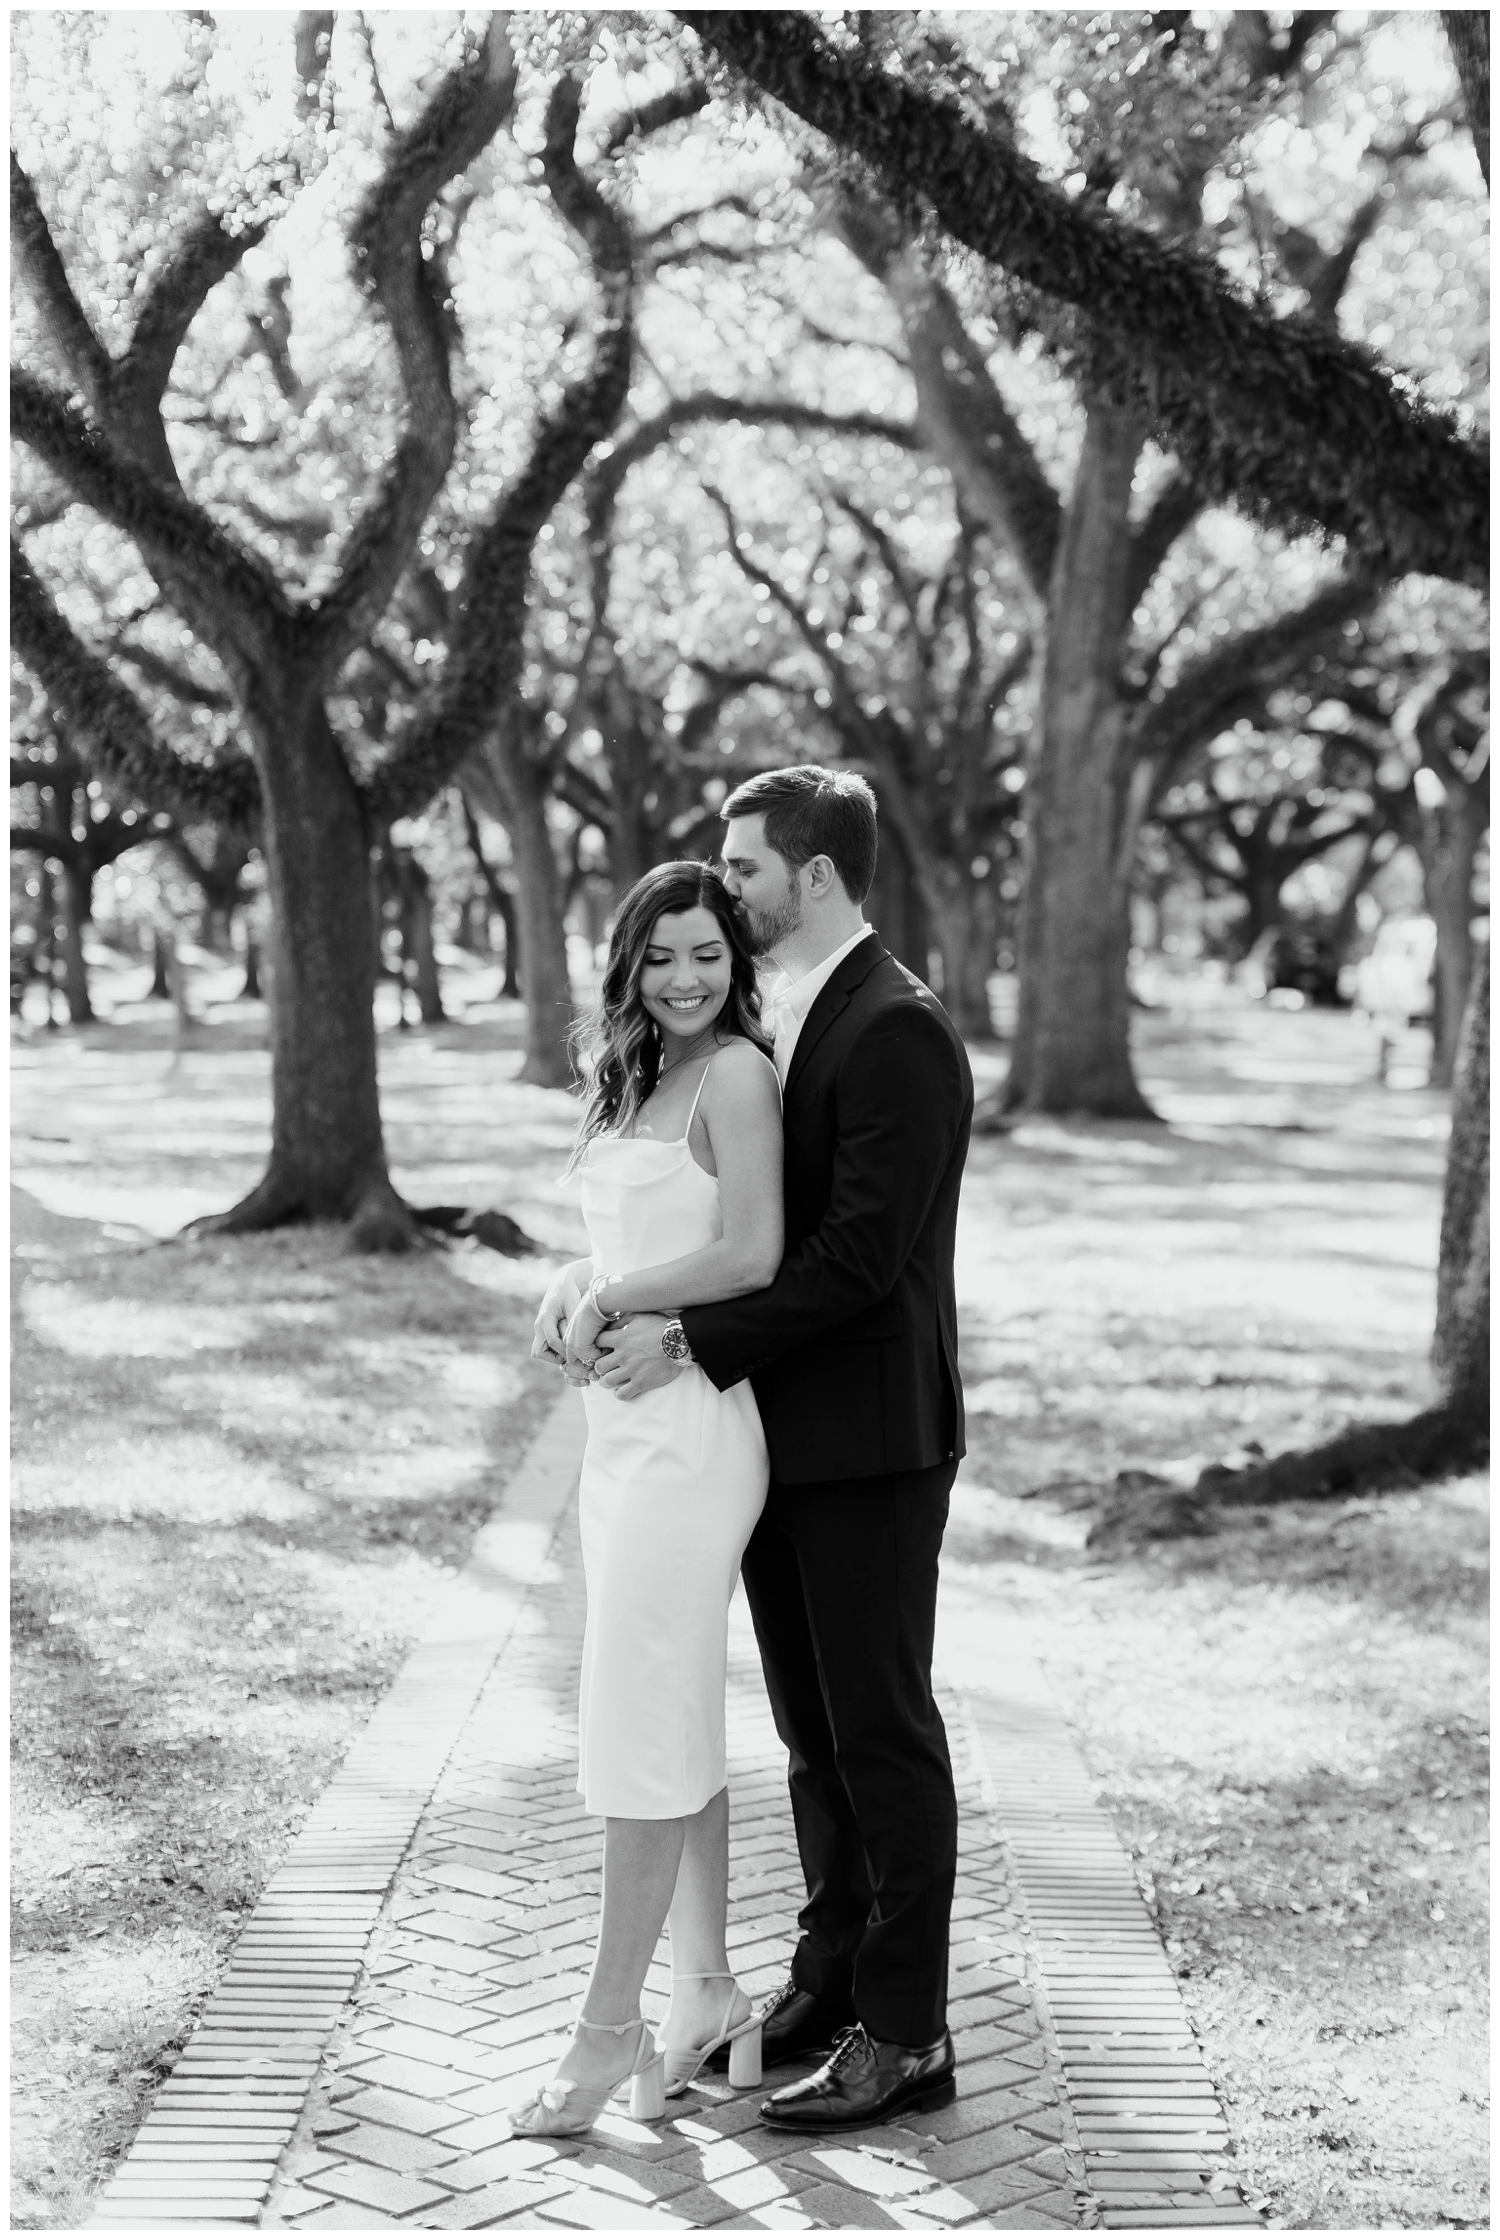 black and white image of engaged couple embracing by tree line on sidewalk